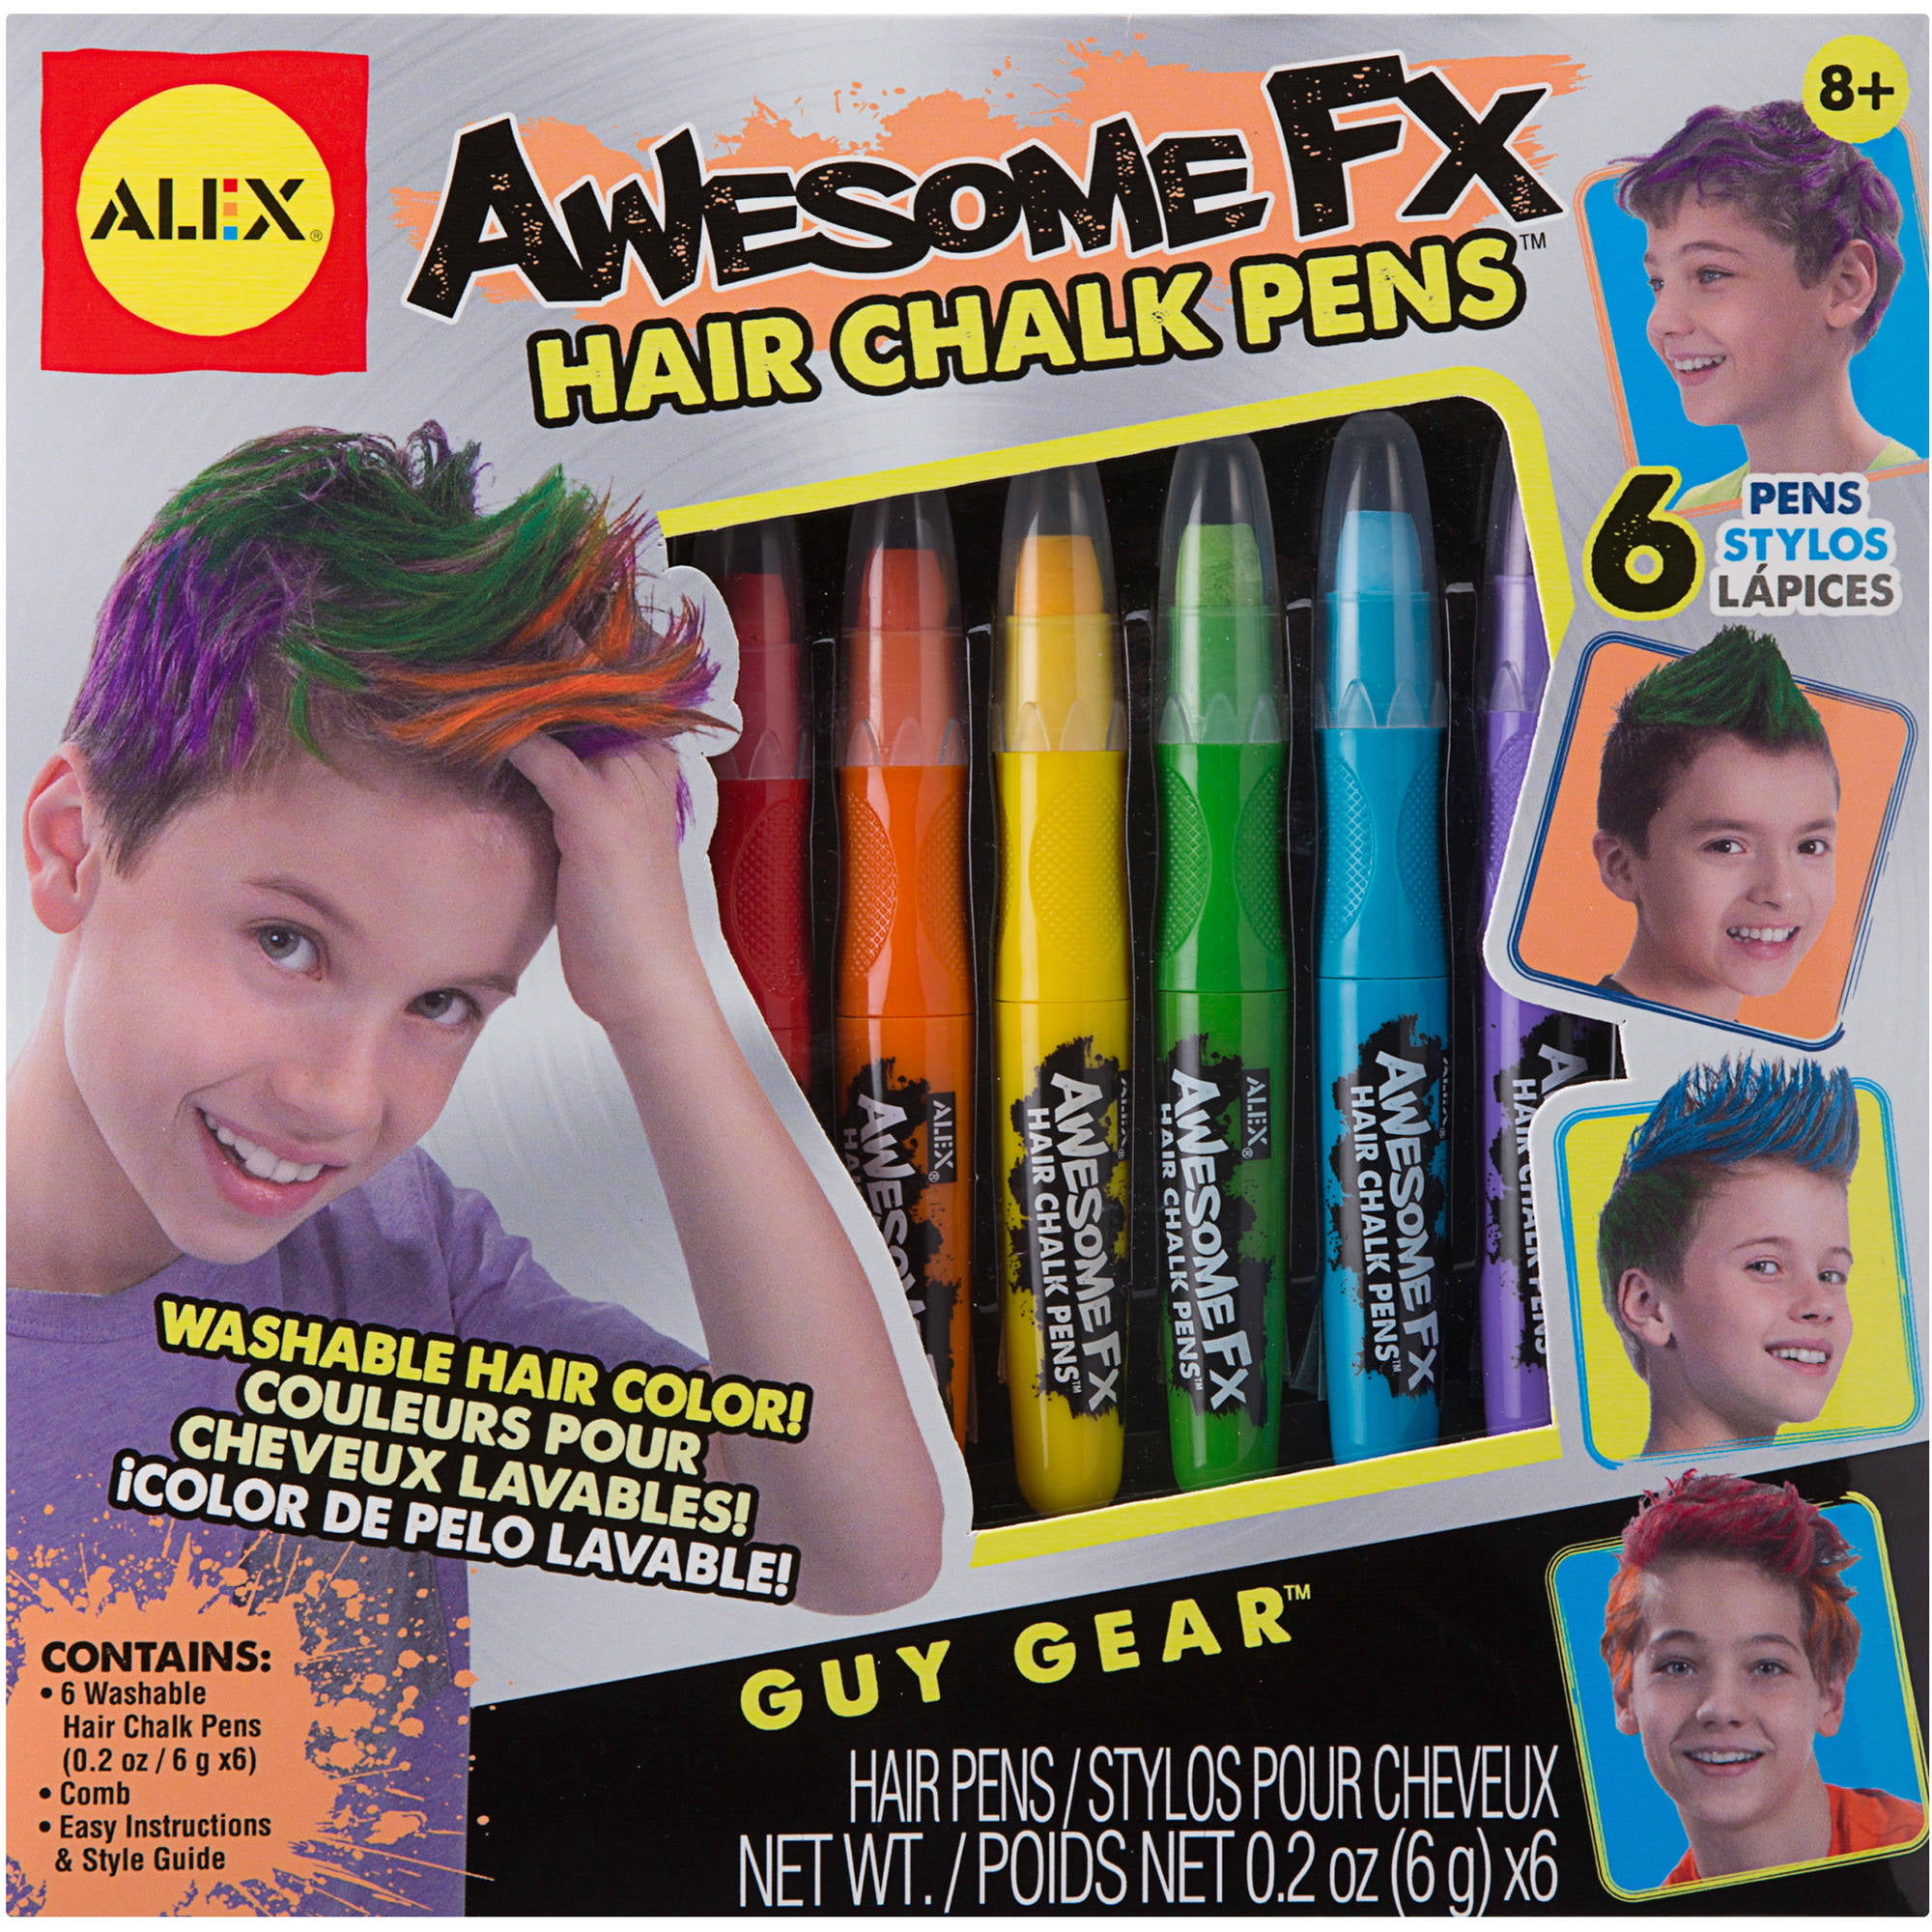 How to Use Hair Chalk: Step-by-Step Guide